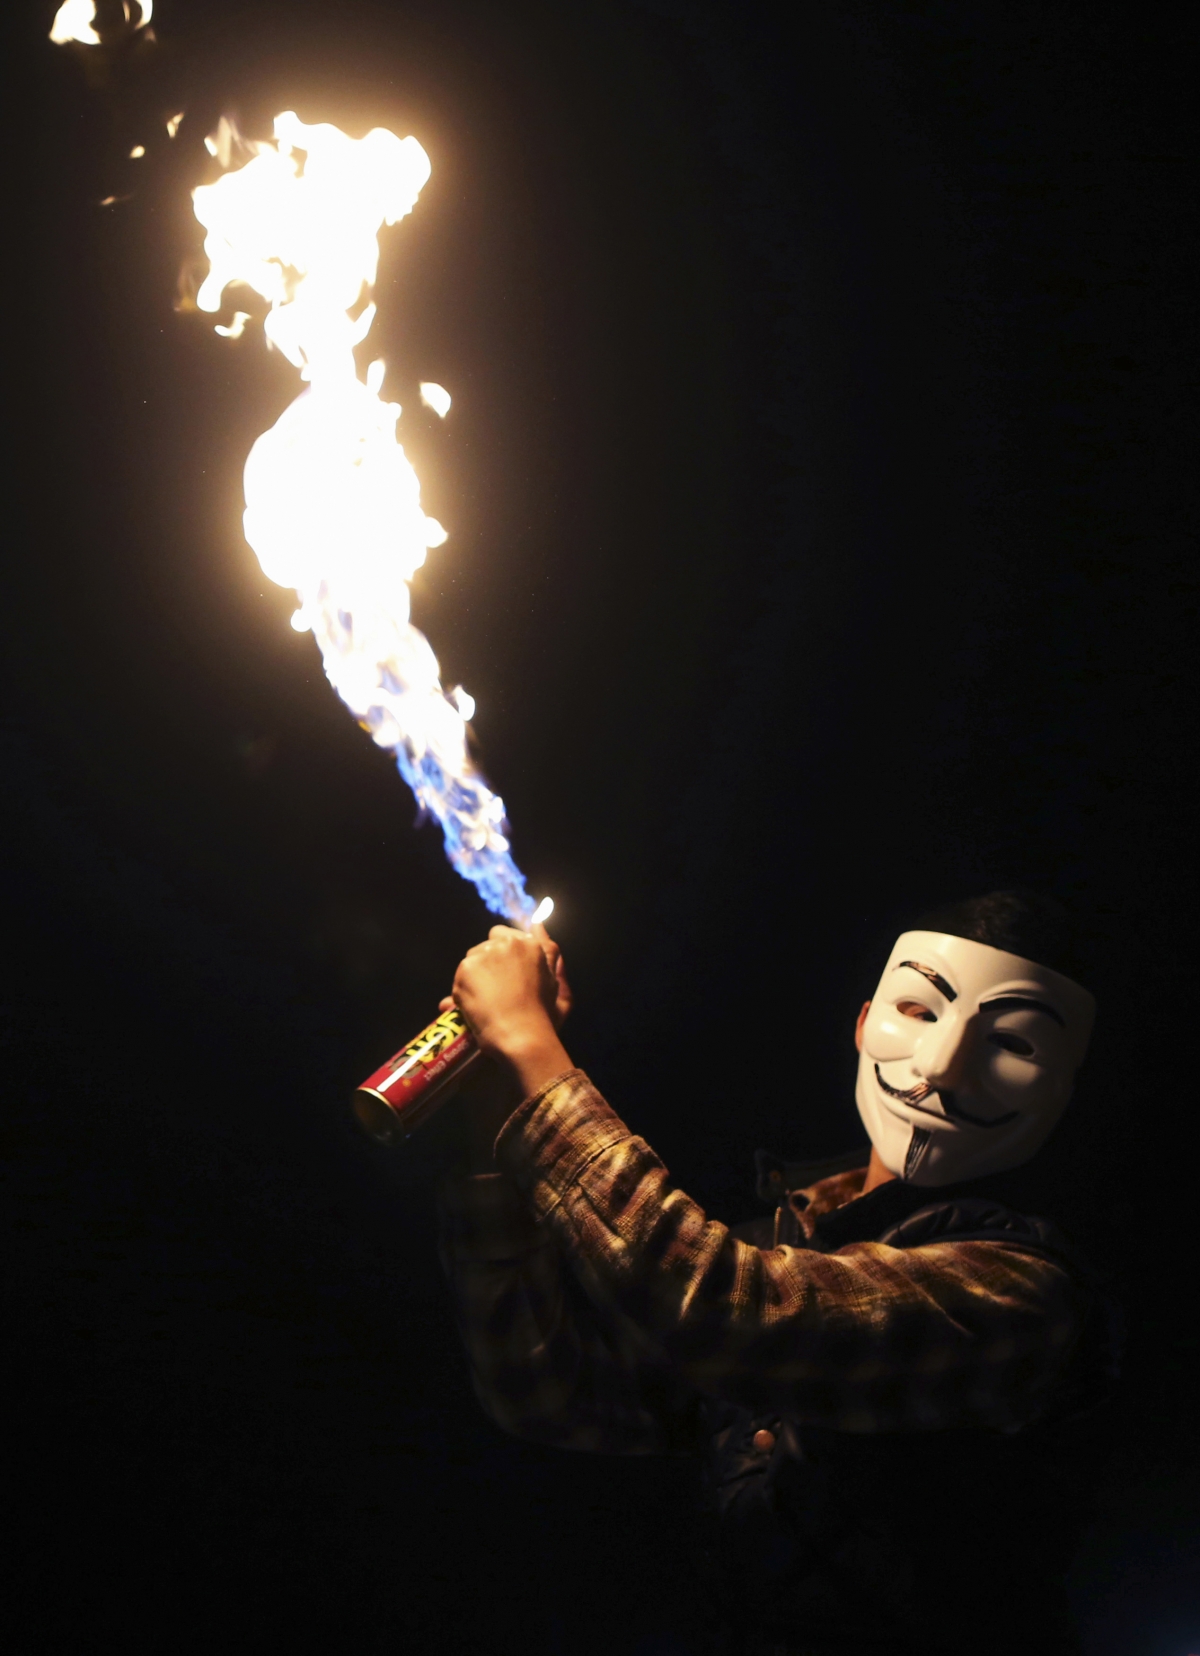 A boy wearing a Guy Fawkes mask celebrates the birth of Prophet Mohammad during a procession in Libya.